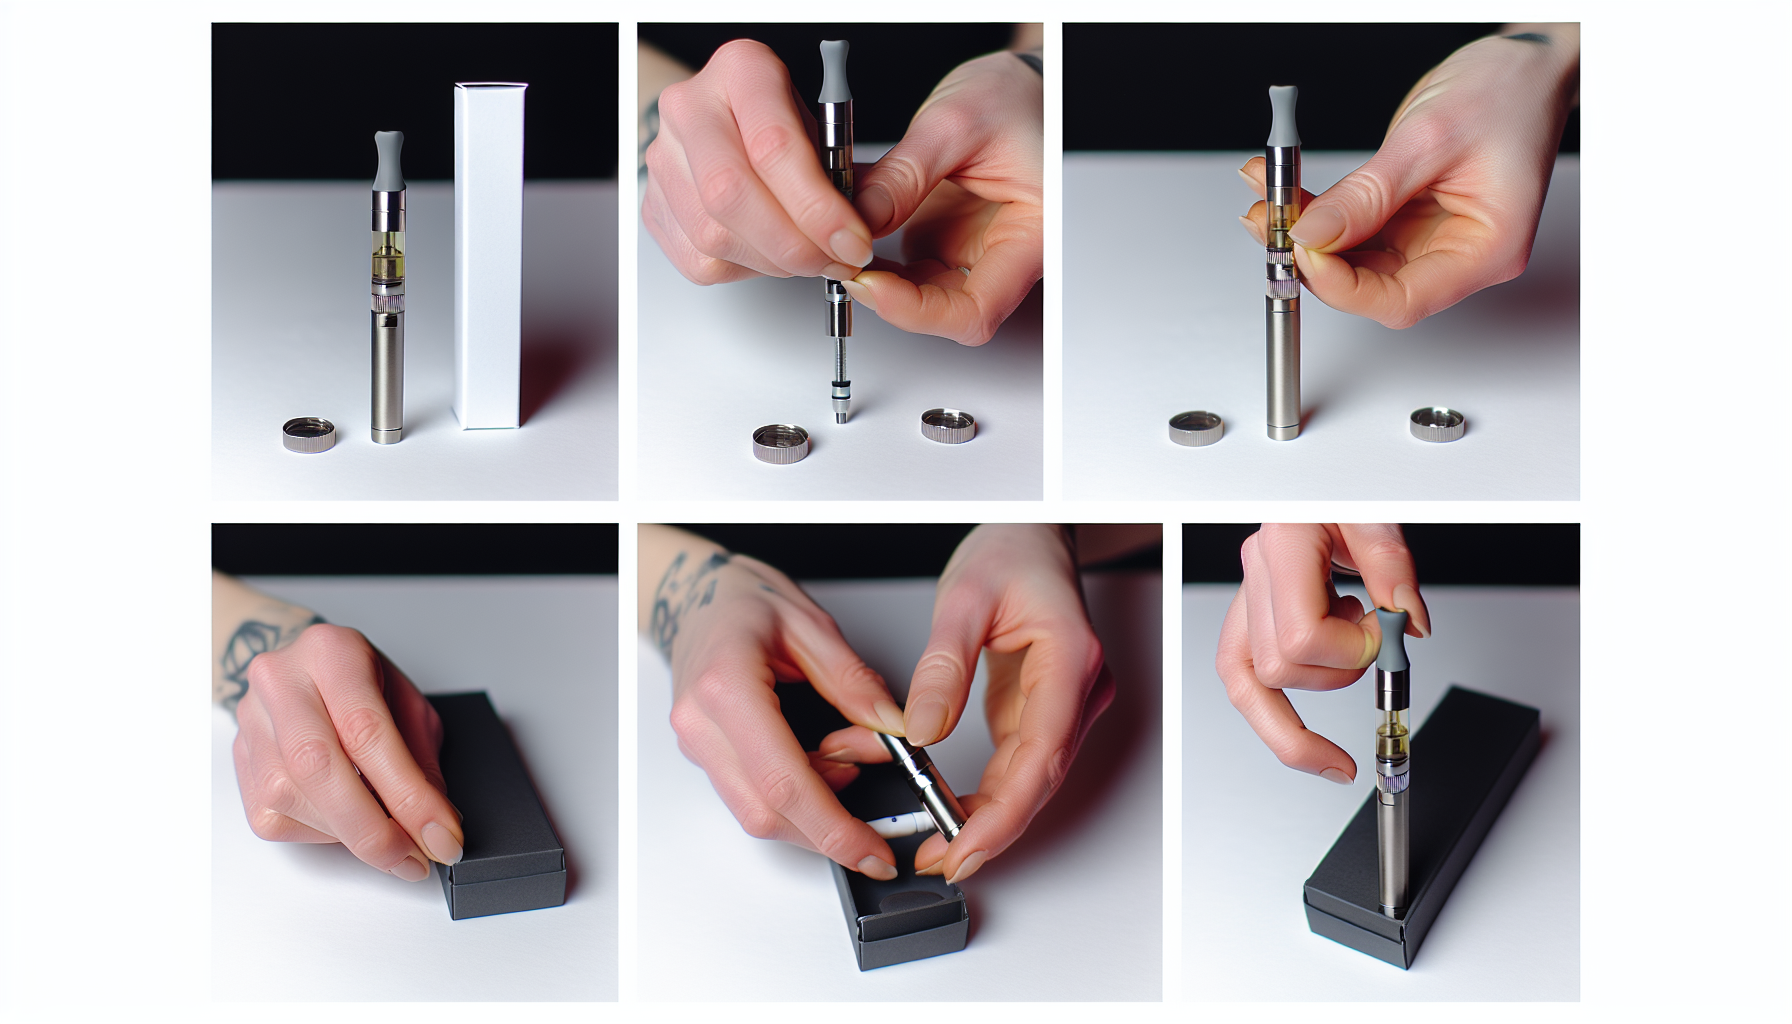 Step-by-step guide for setting up a vape cartridge